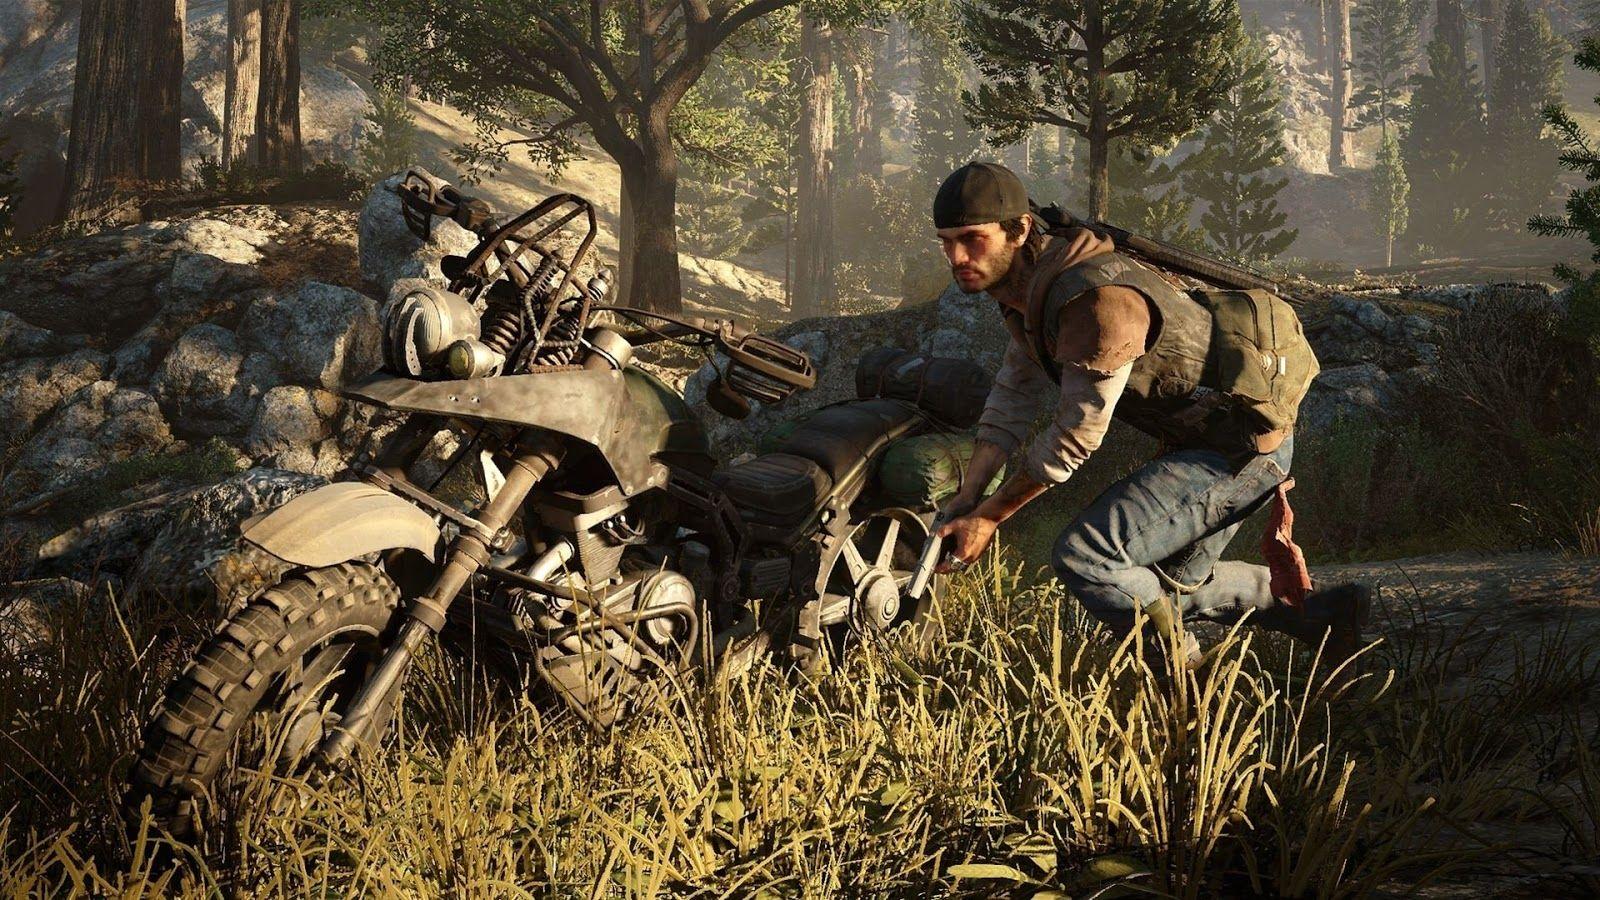 Download Days Gone HD Wallpaper. Playstation, Xbox and PC games